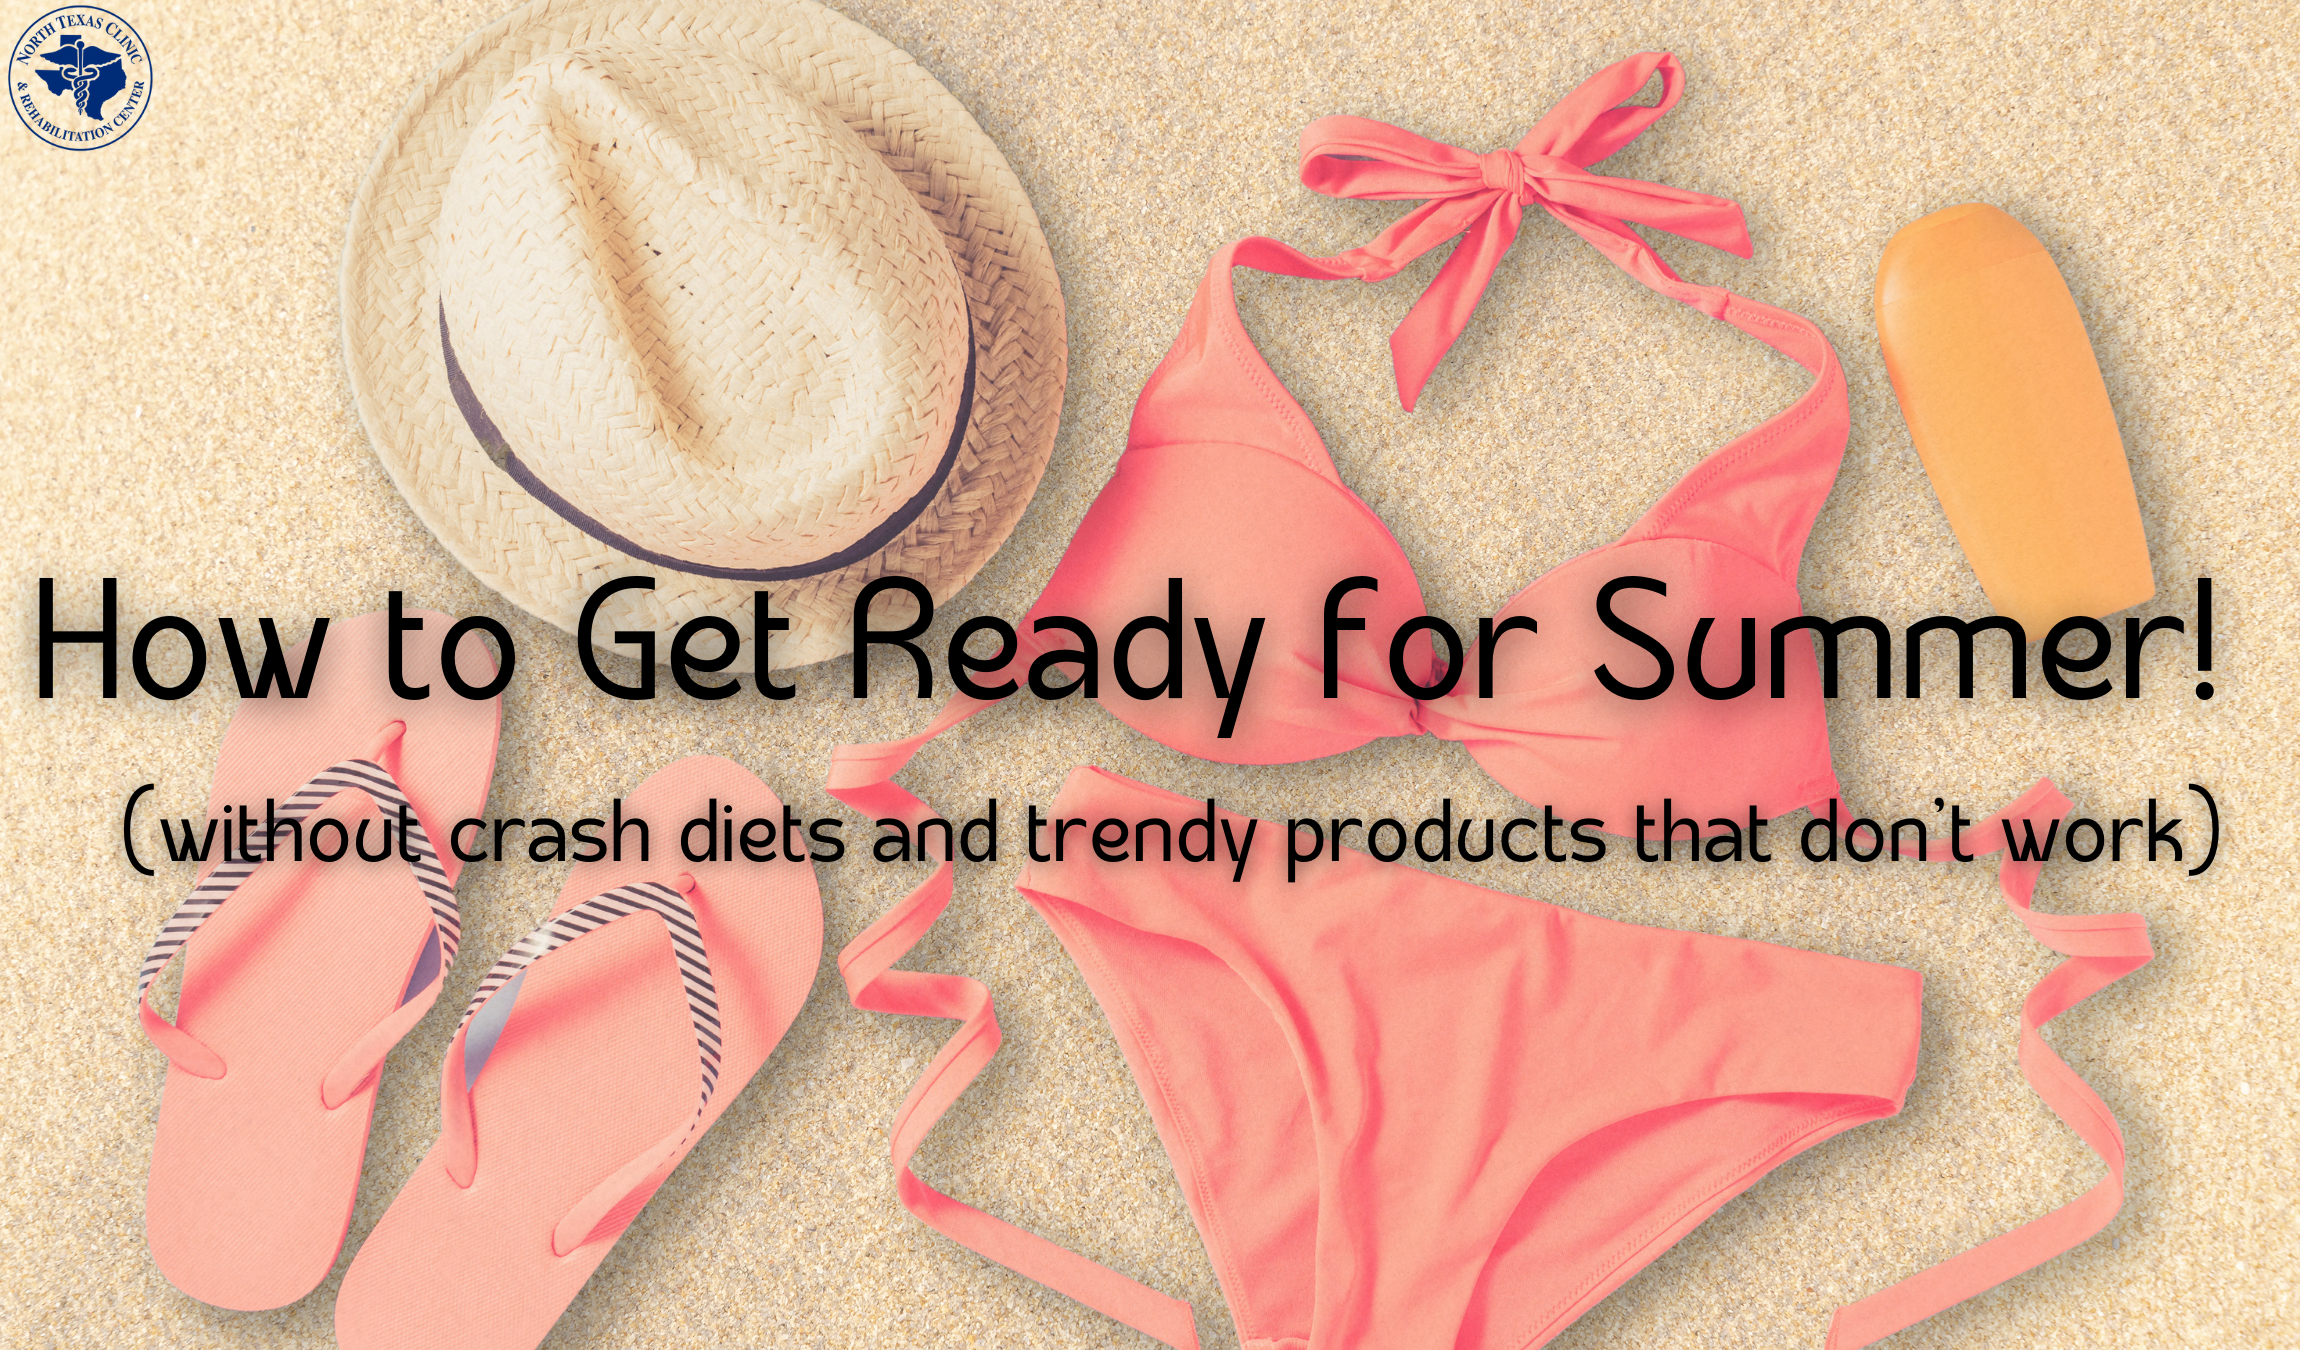 How to get ready for summer (Header with title)